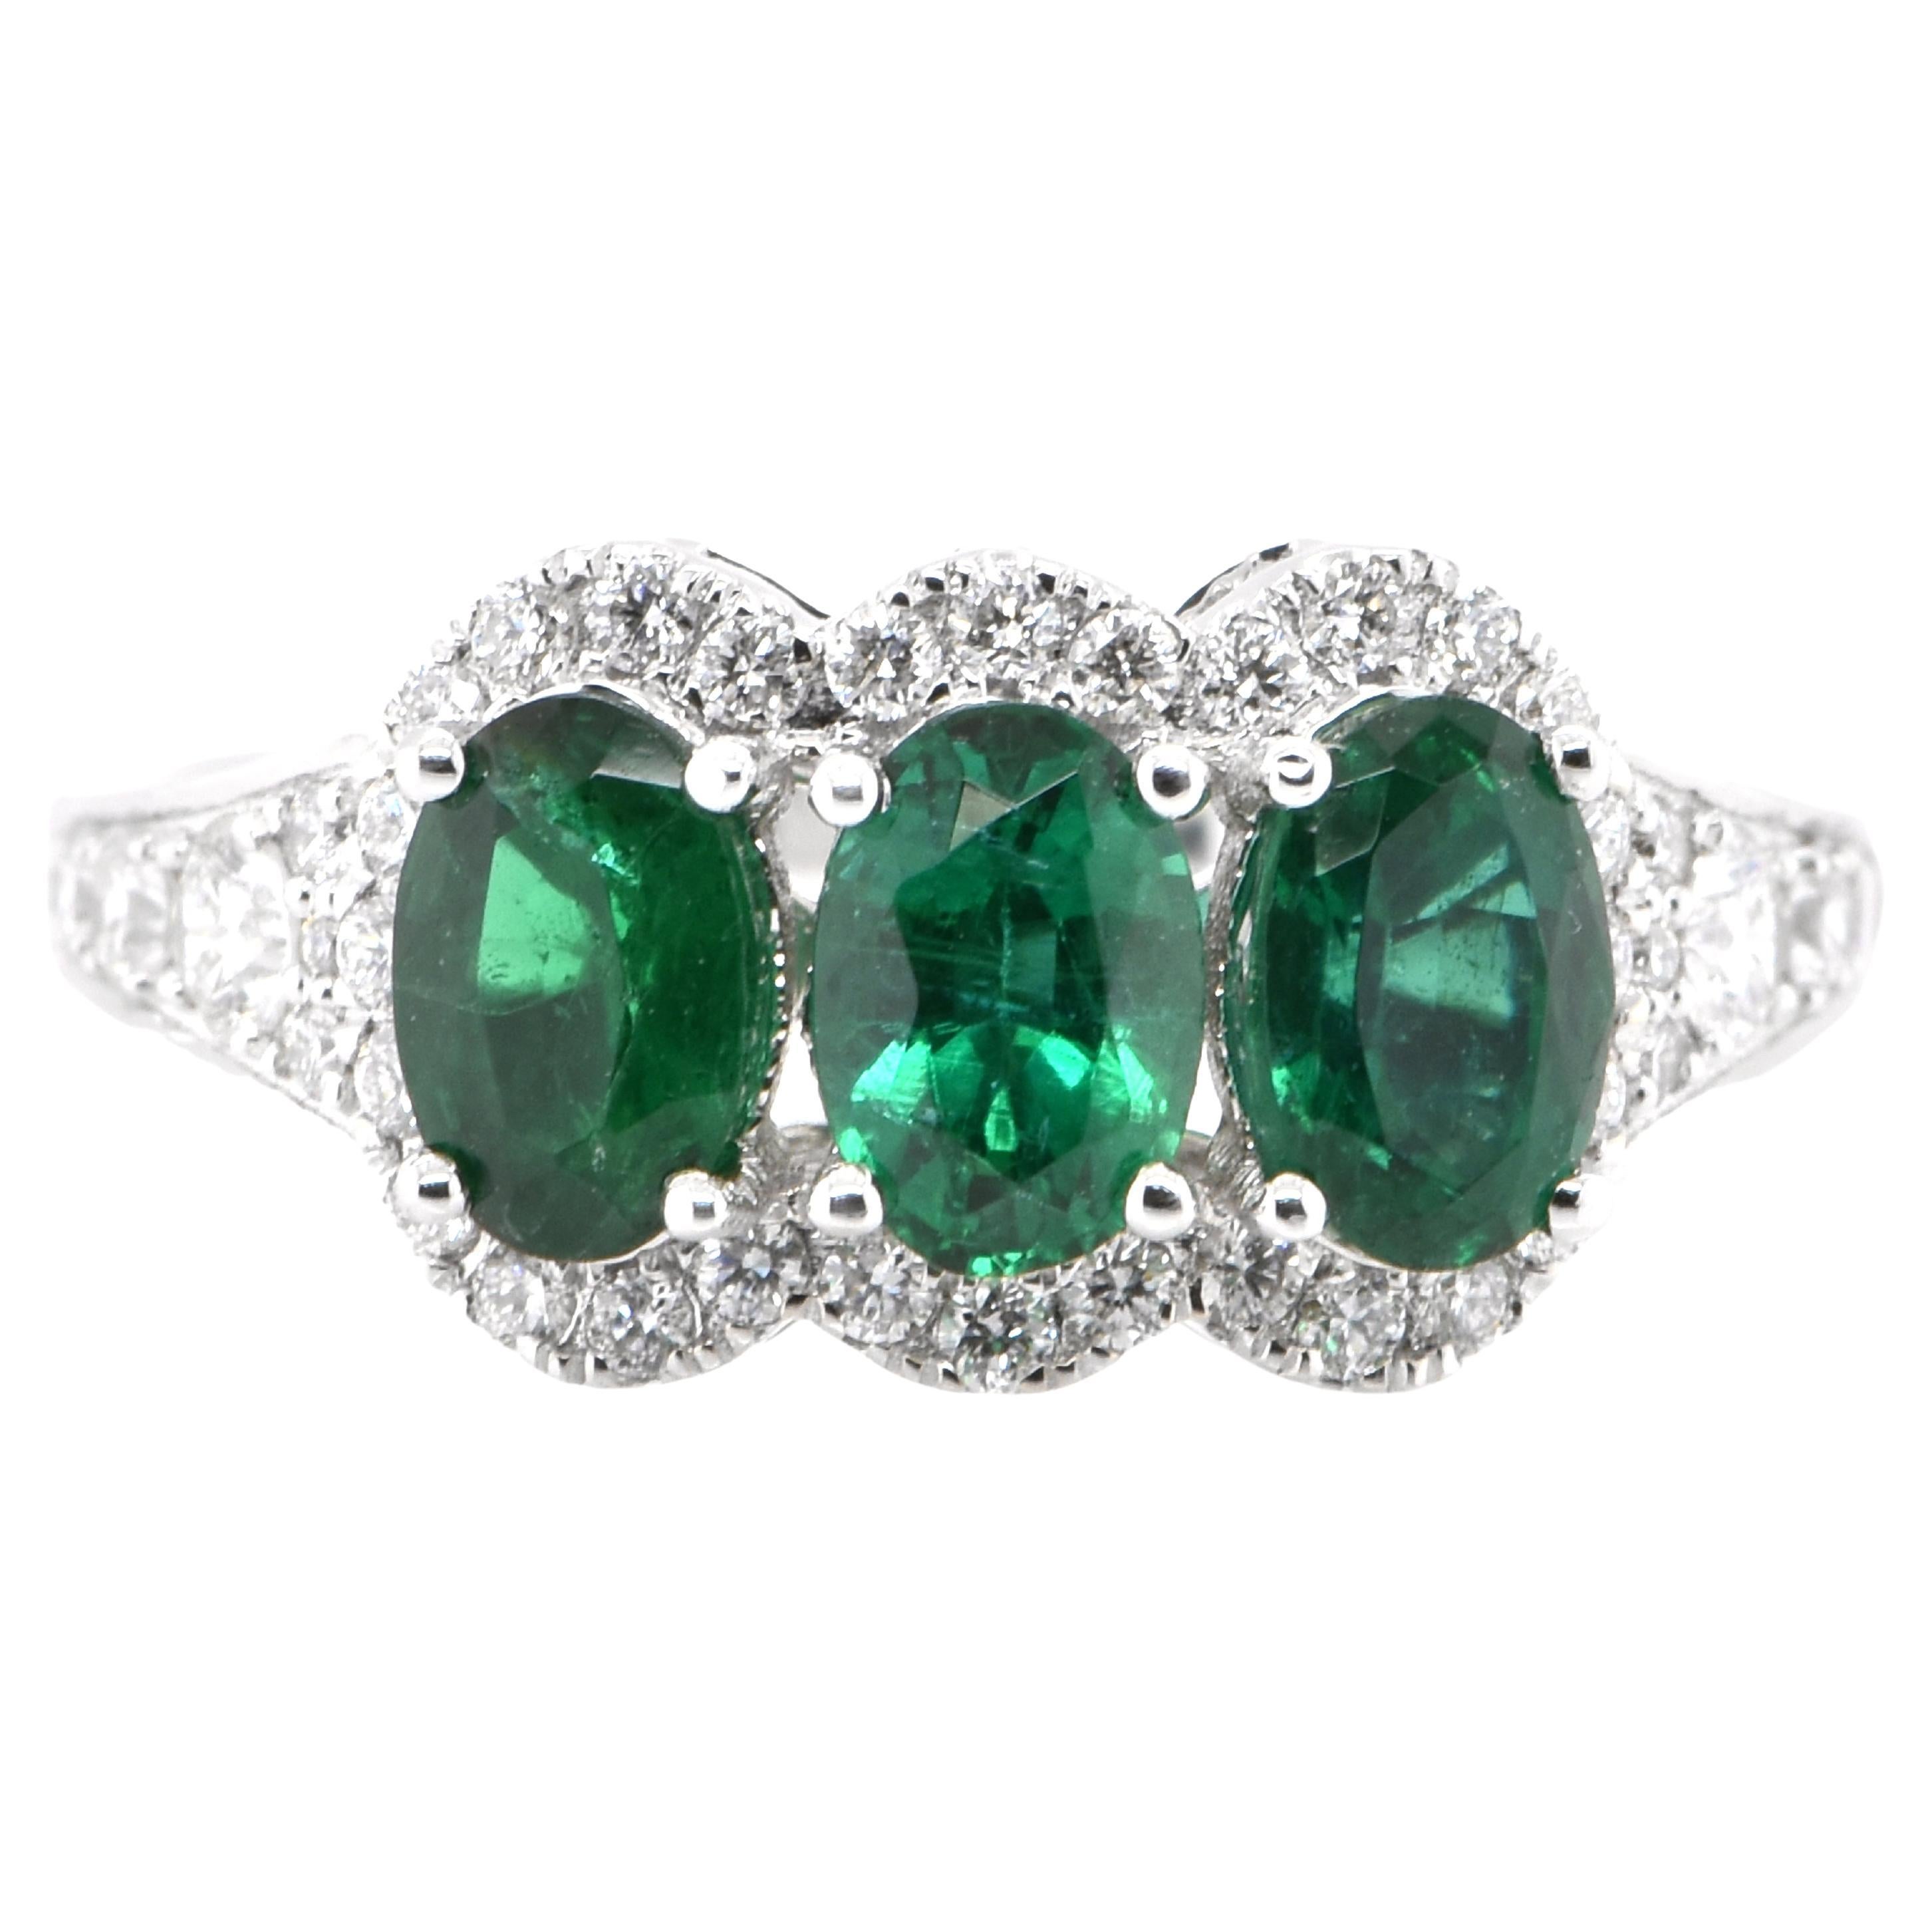 1.50 Carat Natural Emerald and Diamond Cluster Ring Set in 18K White Gold For Sale